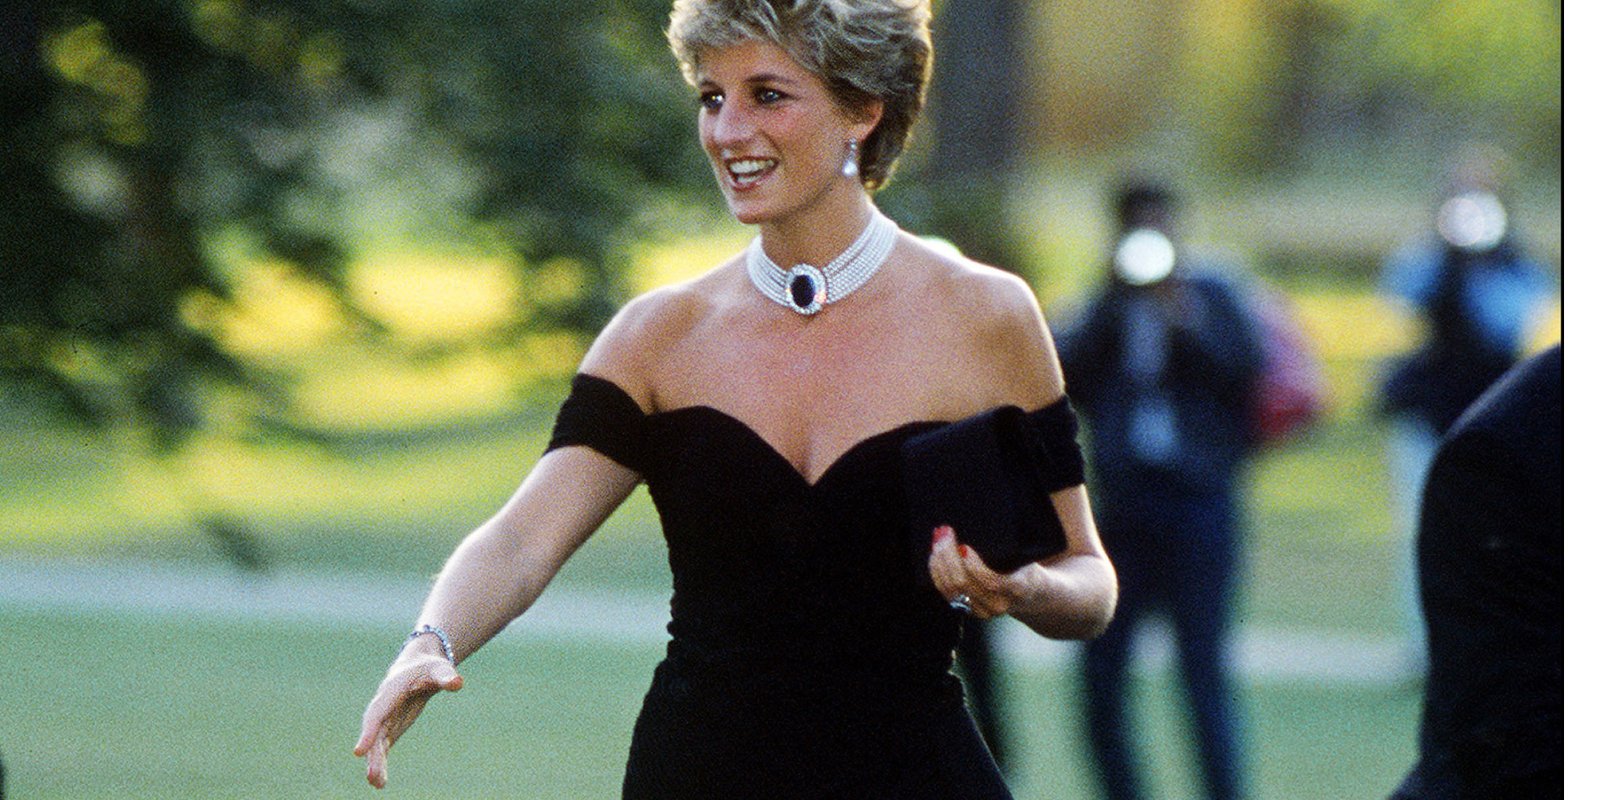 Princess Diana wearing a black strapless gown otherwise known as her "revenge dress."